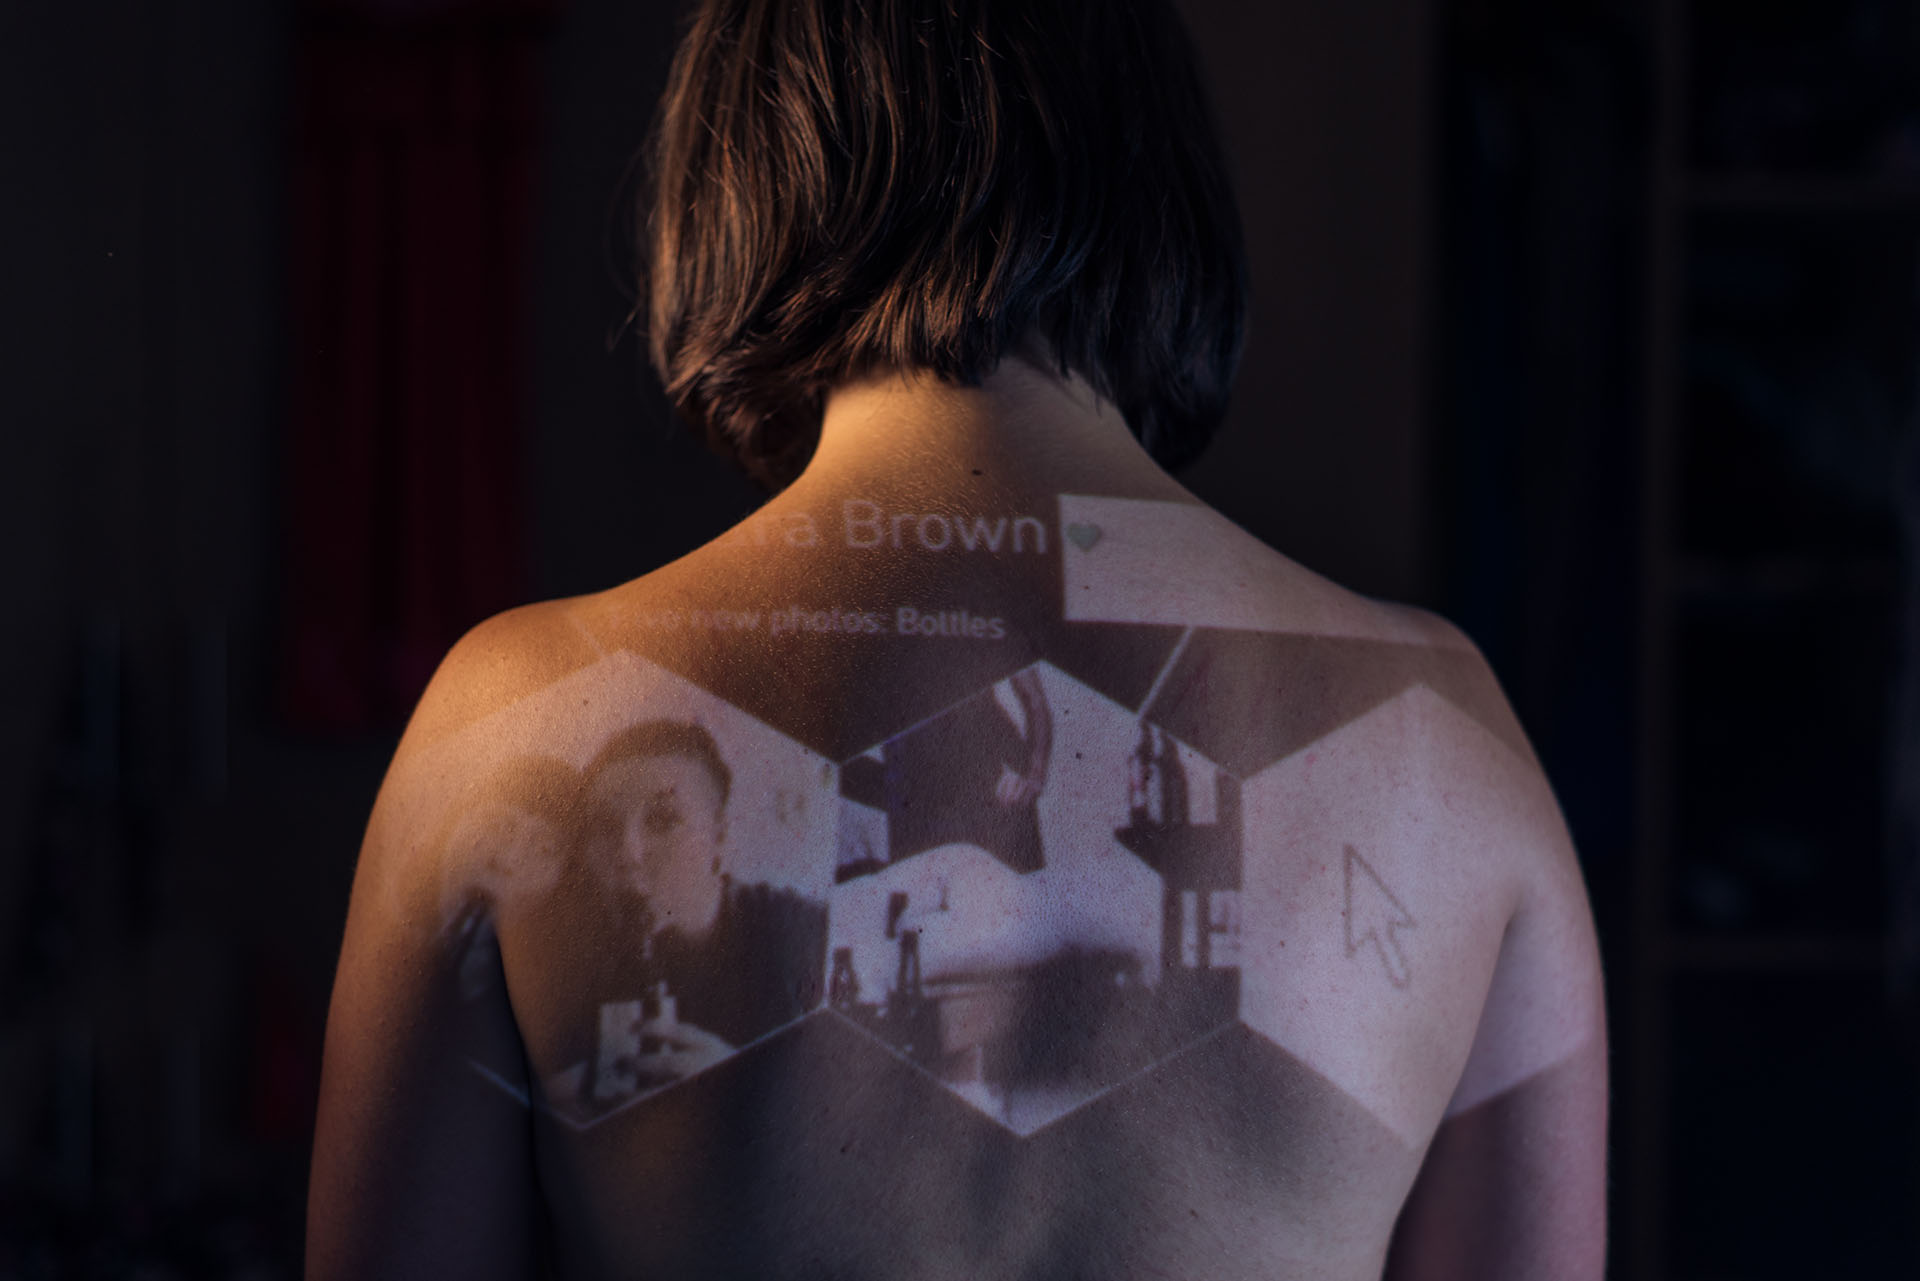 A person with their back to the camera. There are images being projected onto their skin.